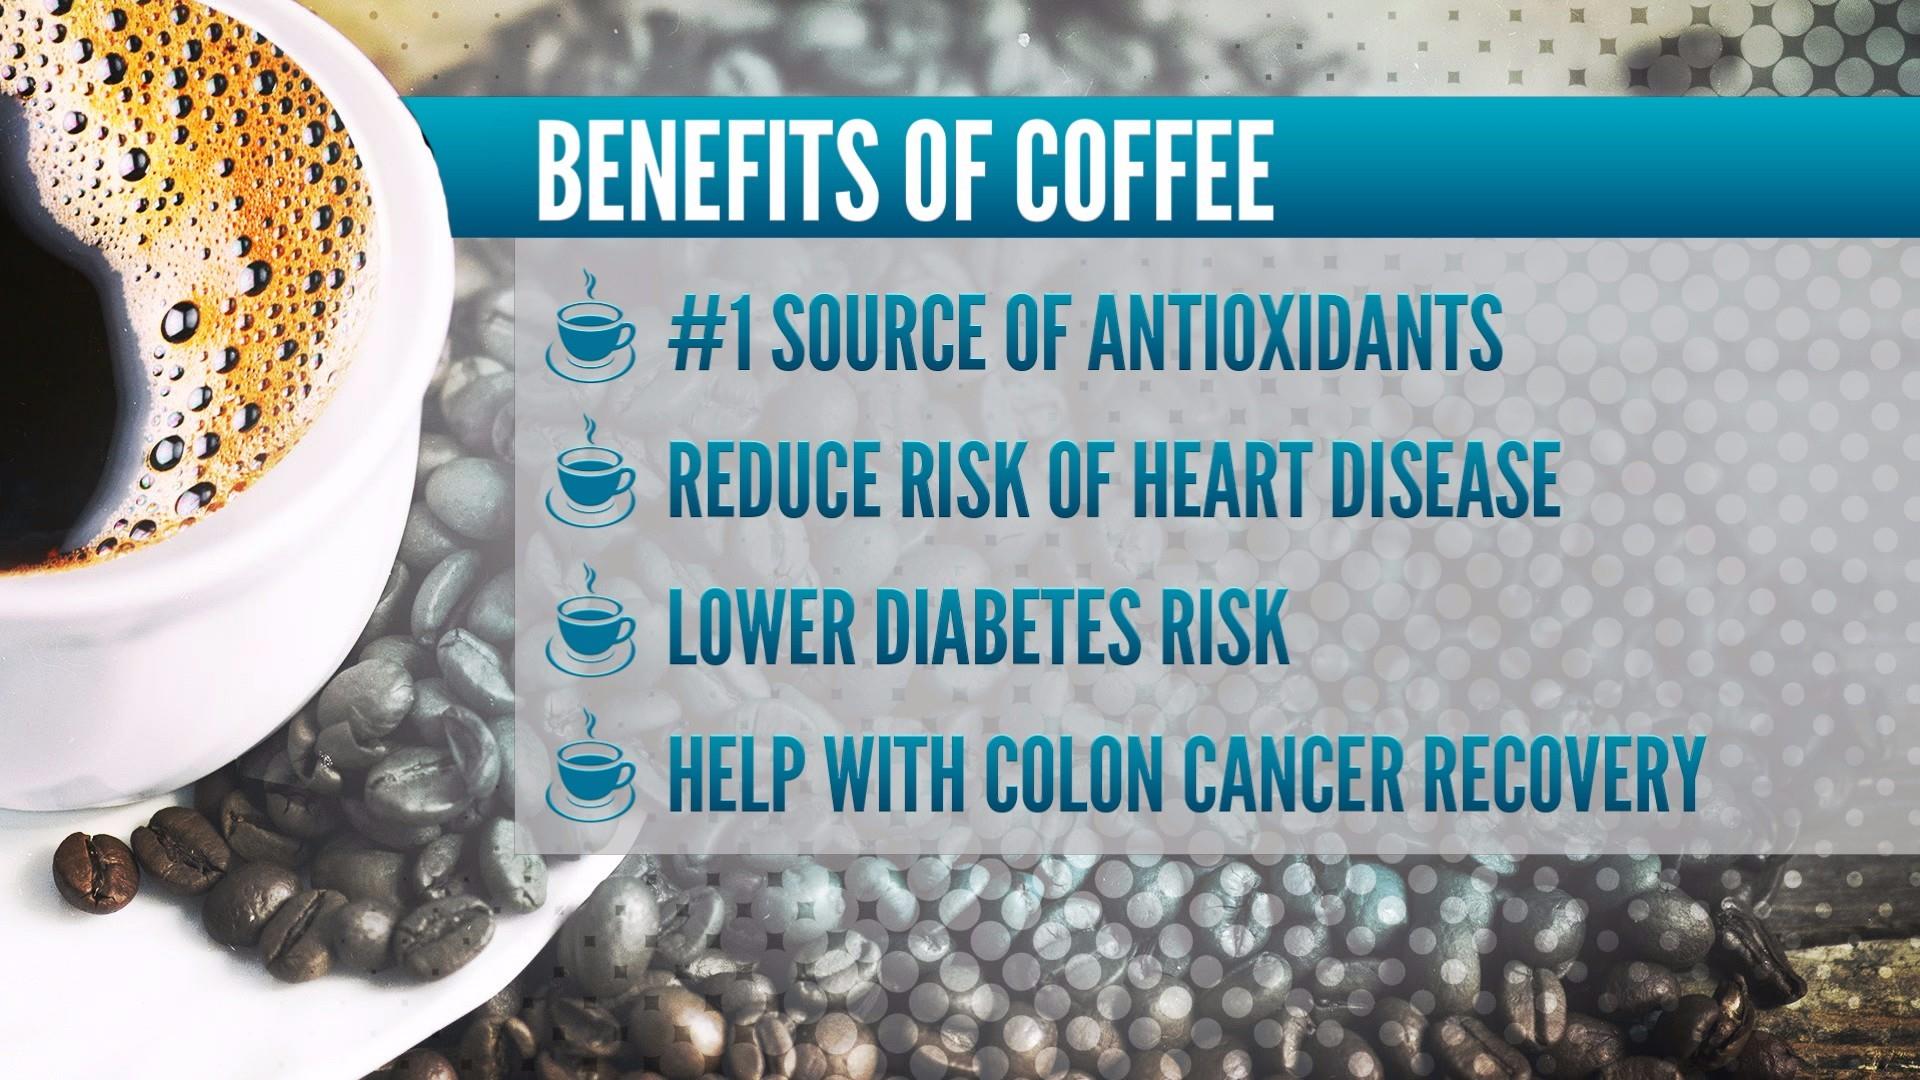 The healthiest way to brew coffee, according to a new study